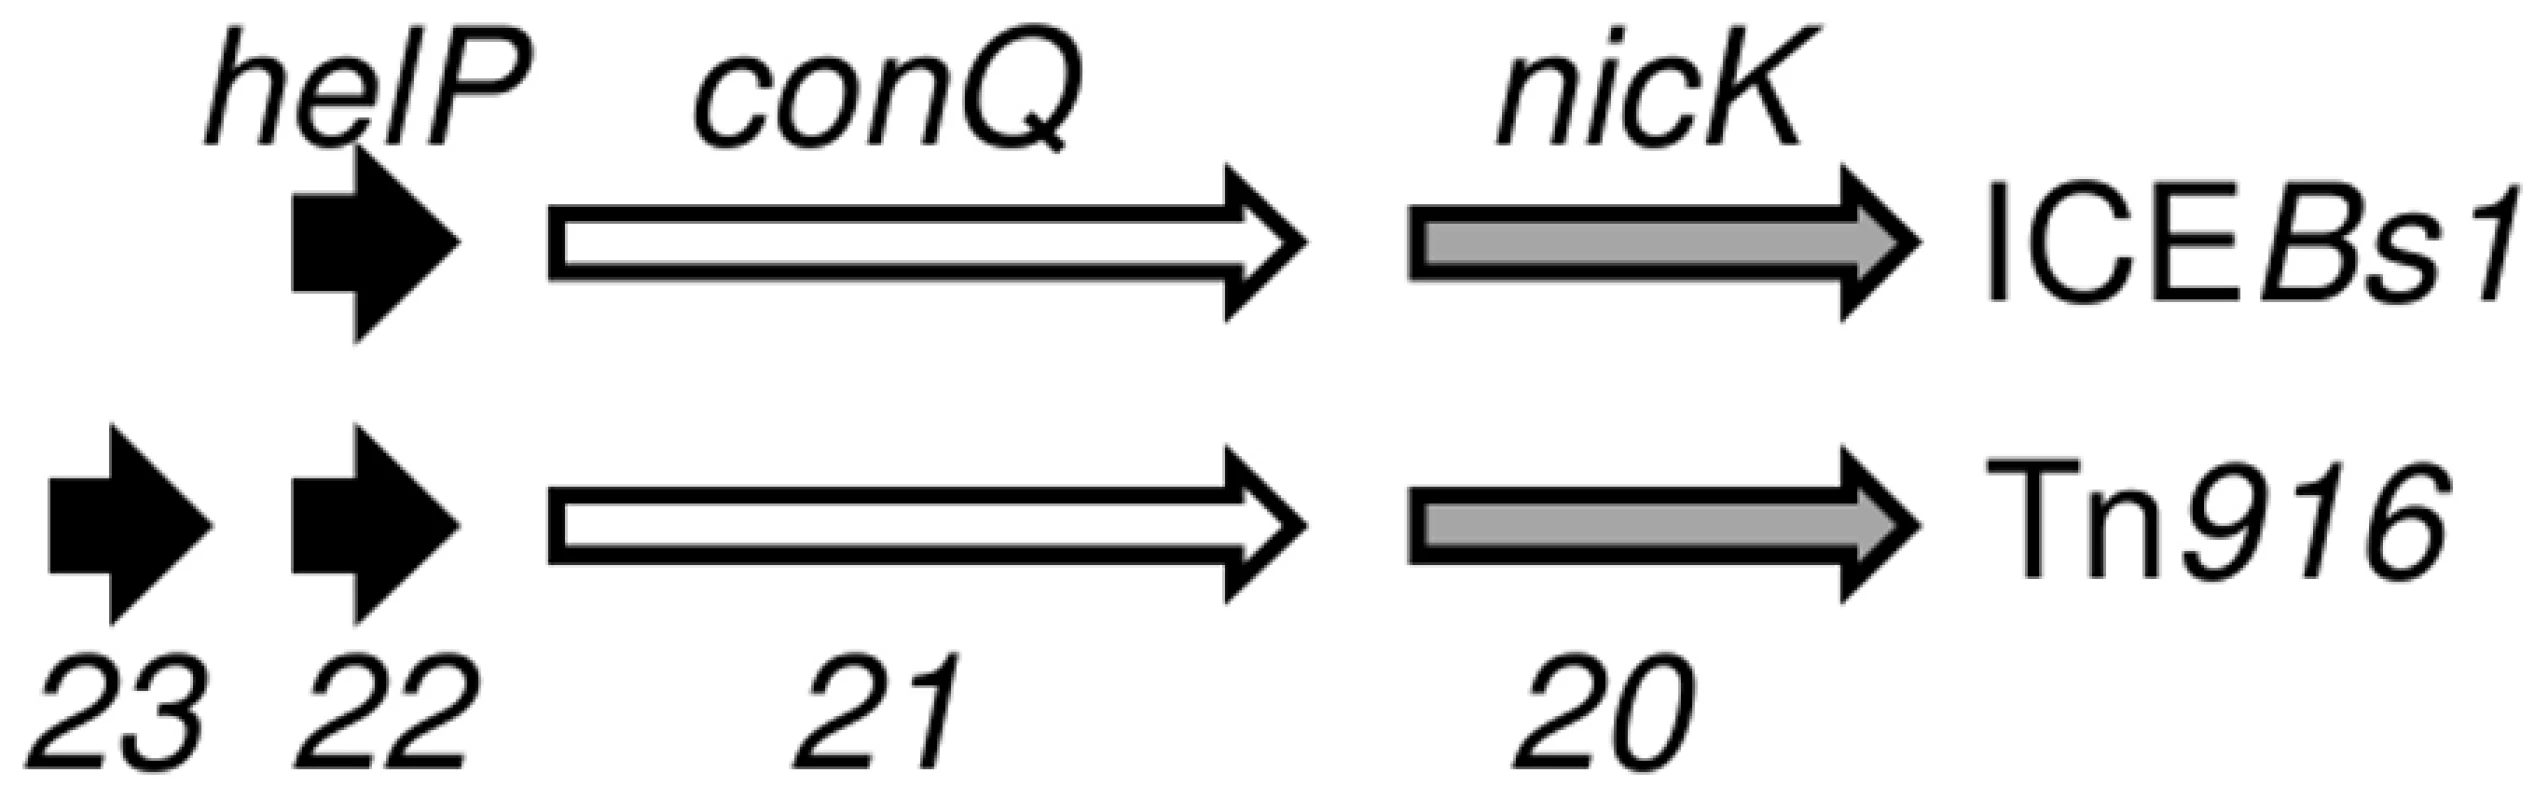 Organization of genes for HelP, ConQ (coupling protein) and NicK homologues in ICE<i>Bs1</i> and Tn<i>916</i>.